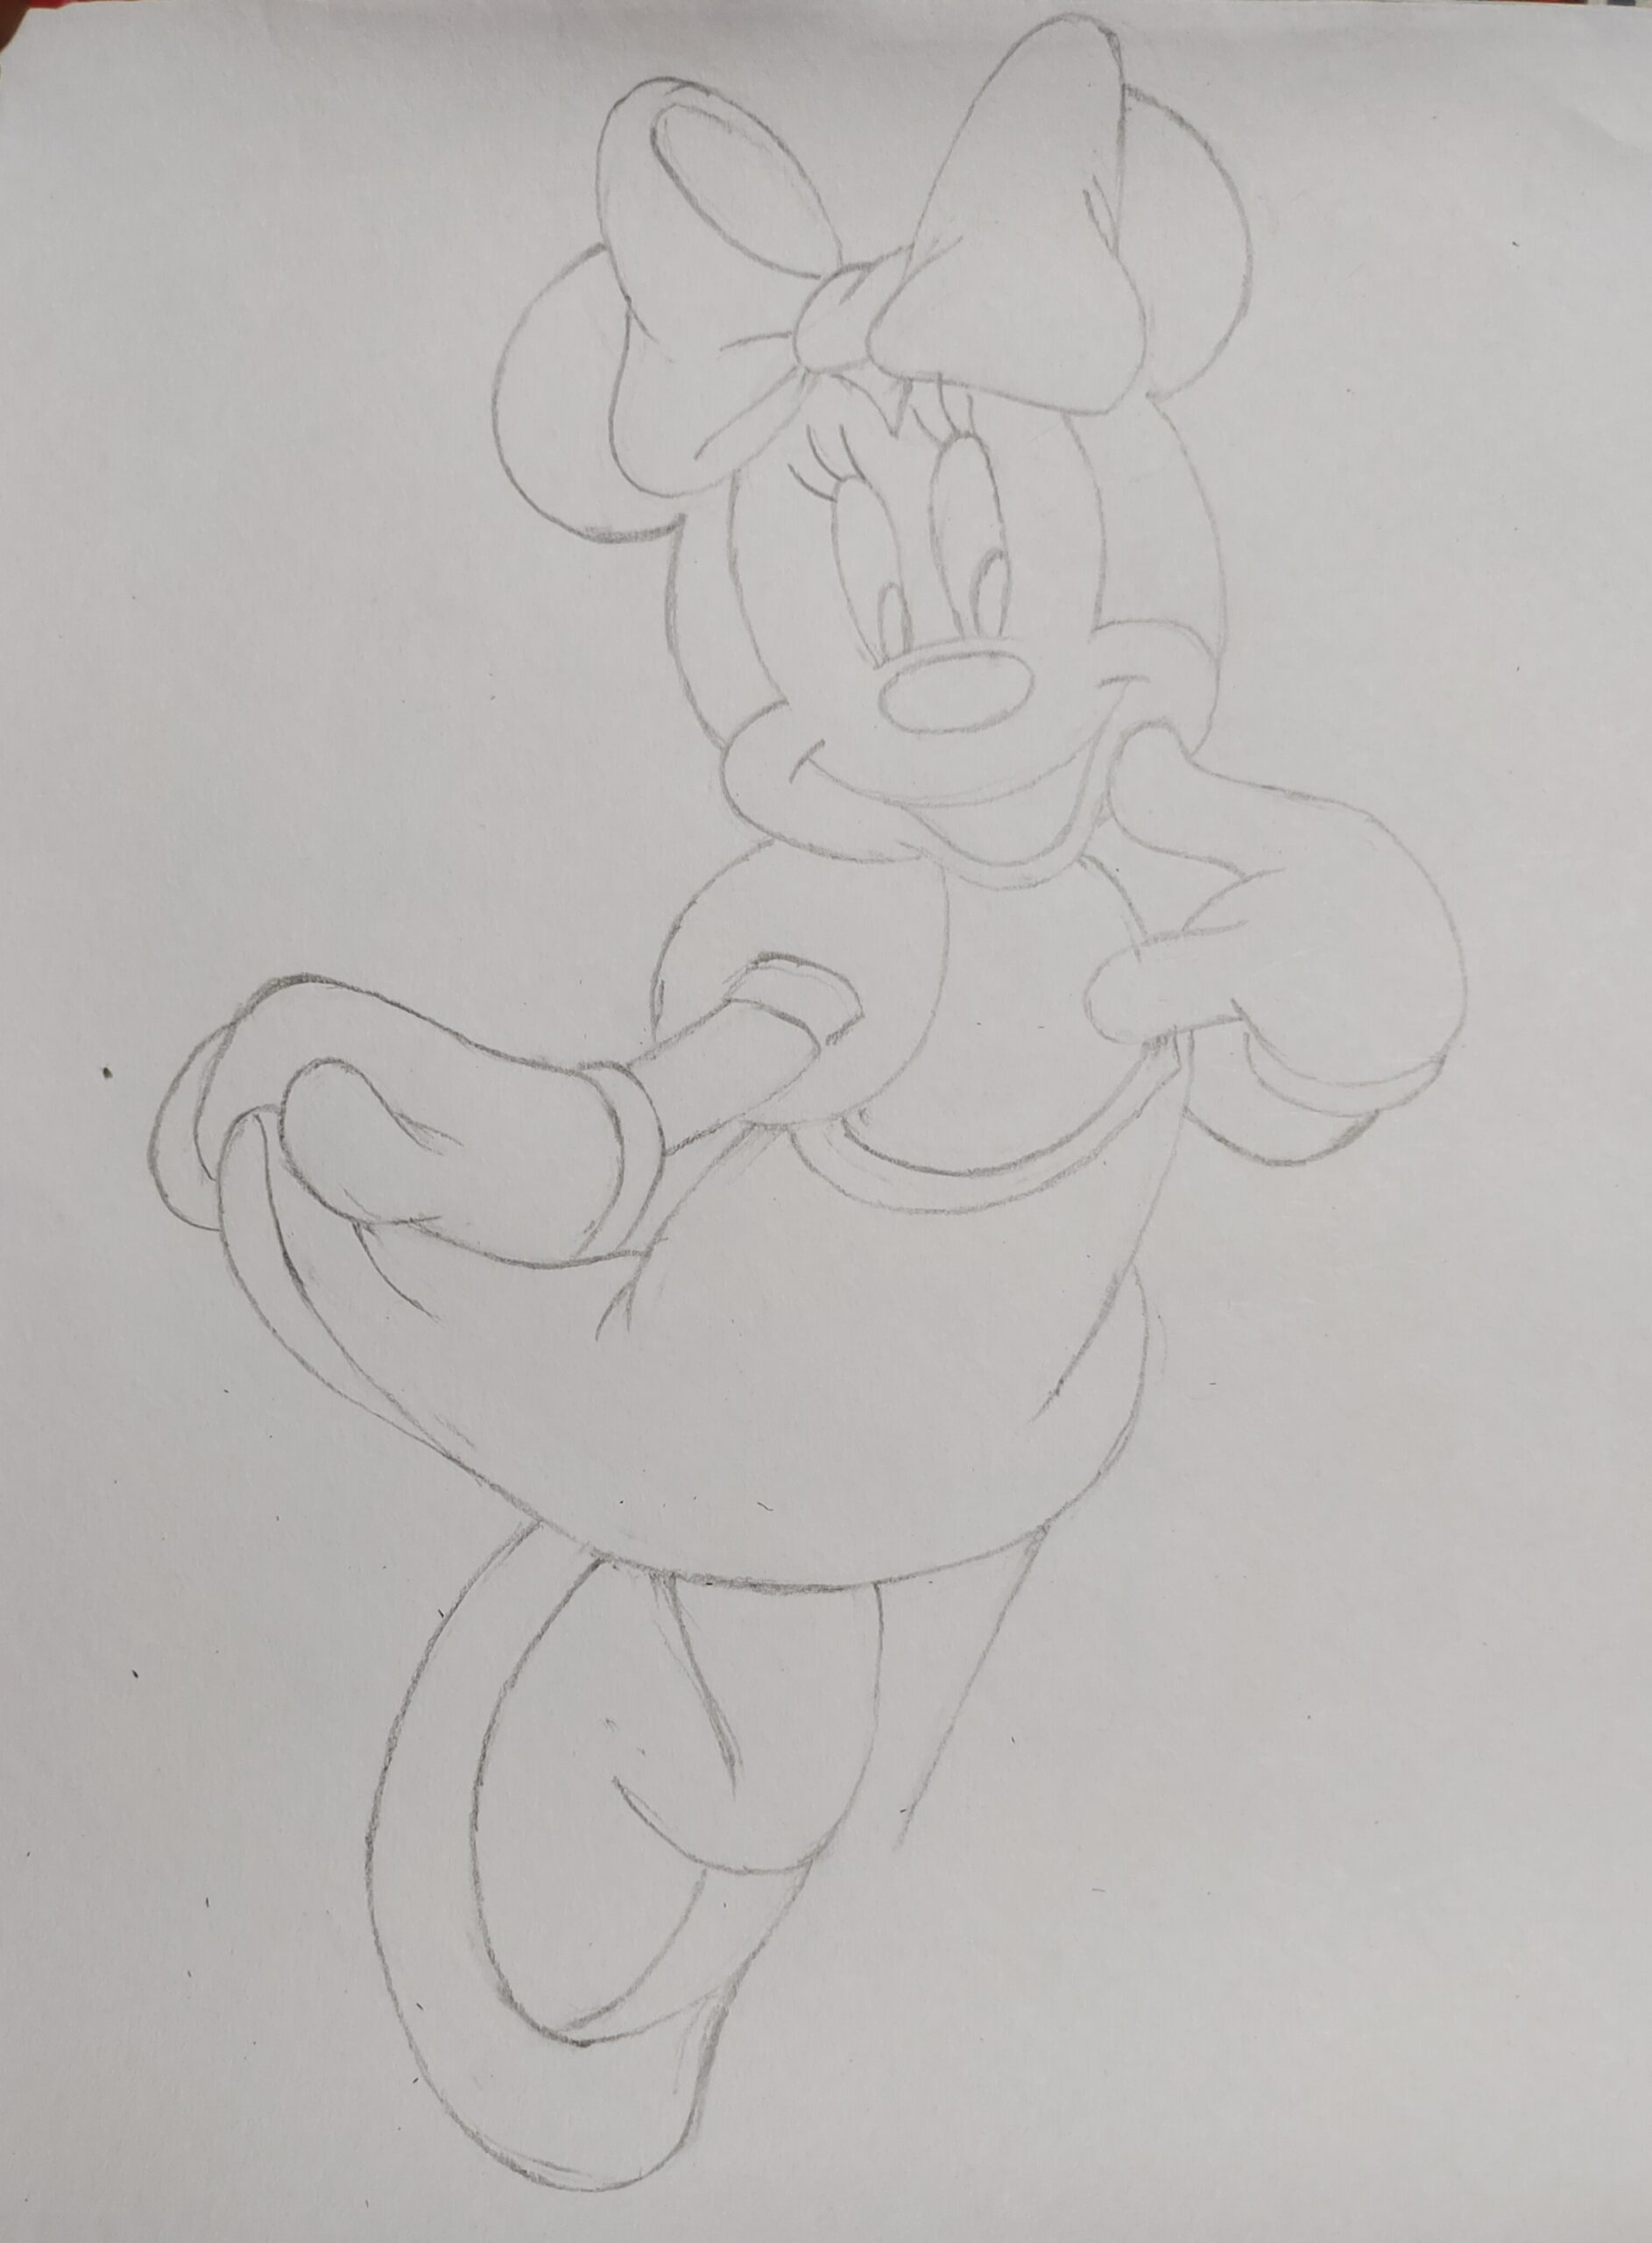 How to draw a Micky Mouse Step by Step